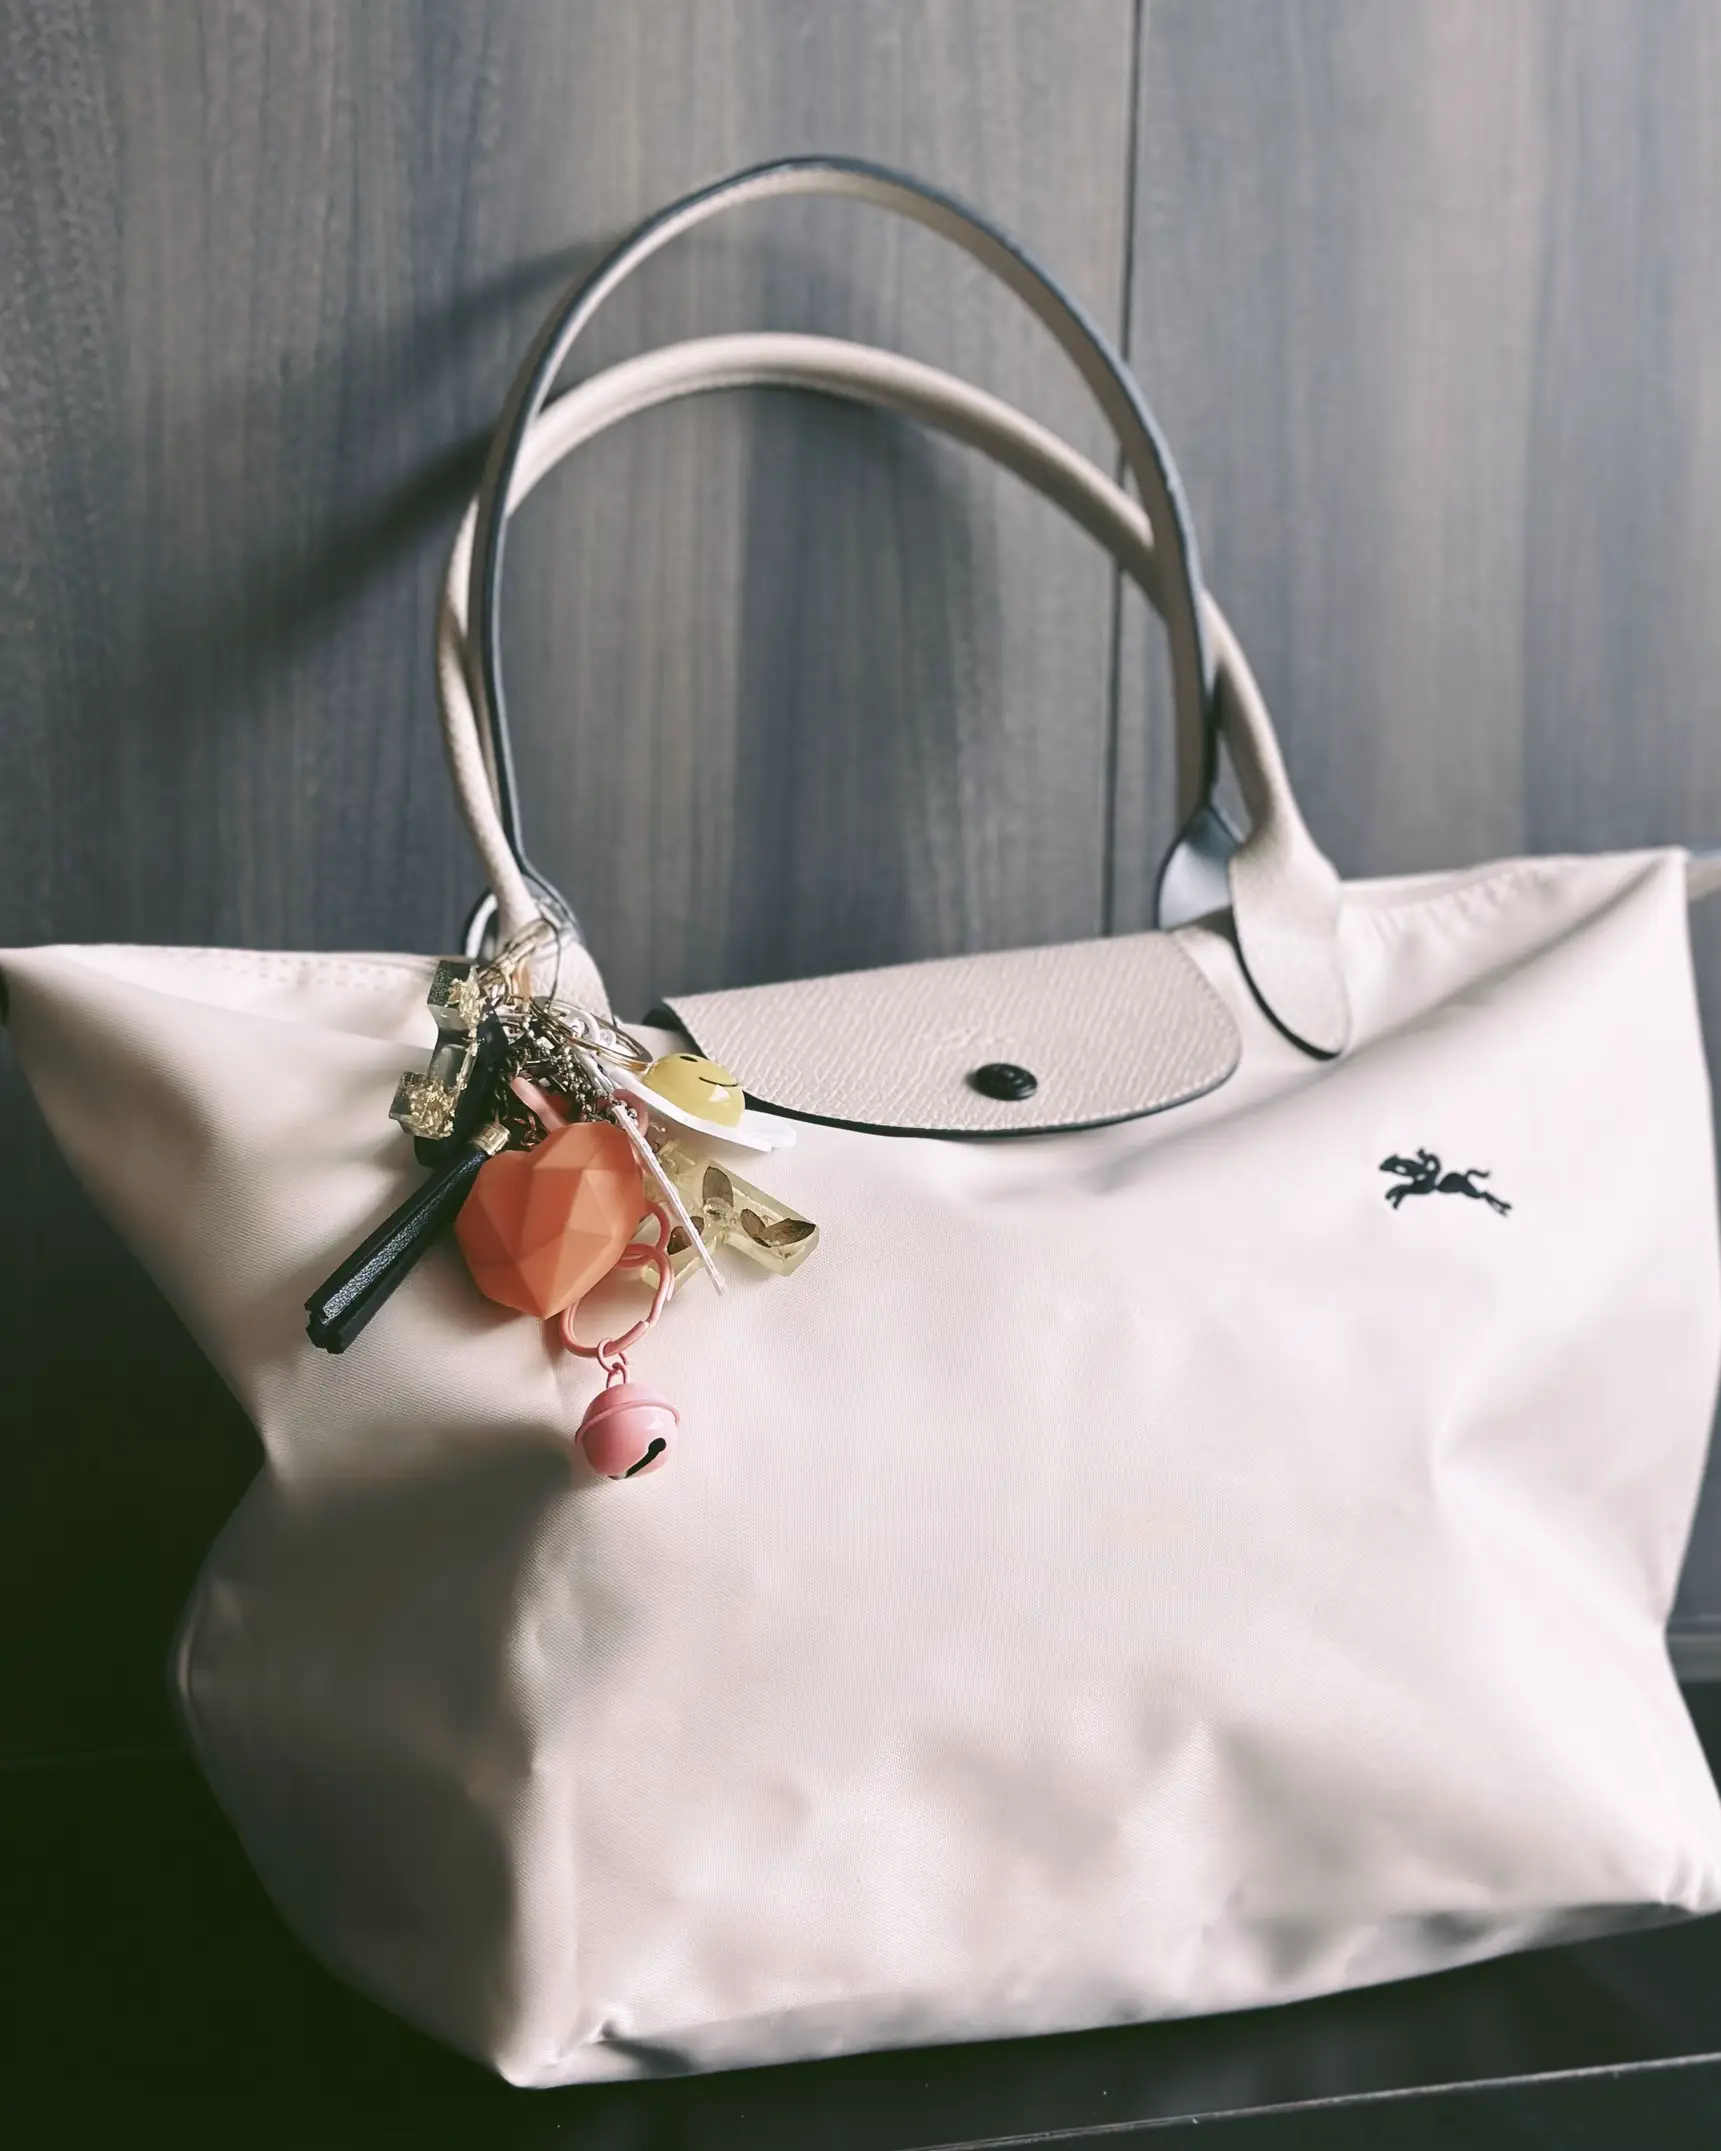 $35 longchamp mini le pliage dupe from taobao👜🫢, Gallery posted by Mandy  Wong